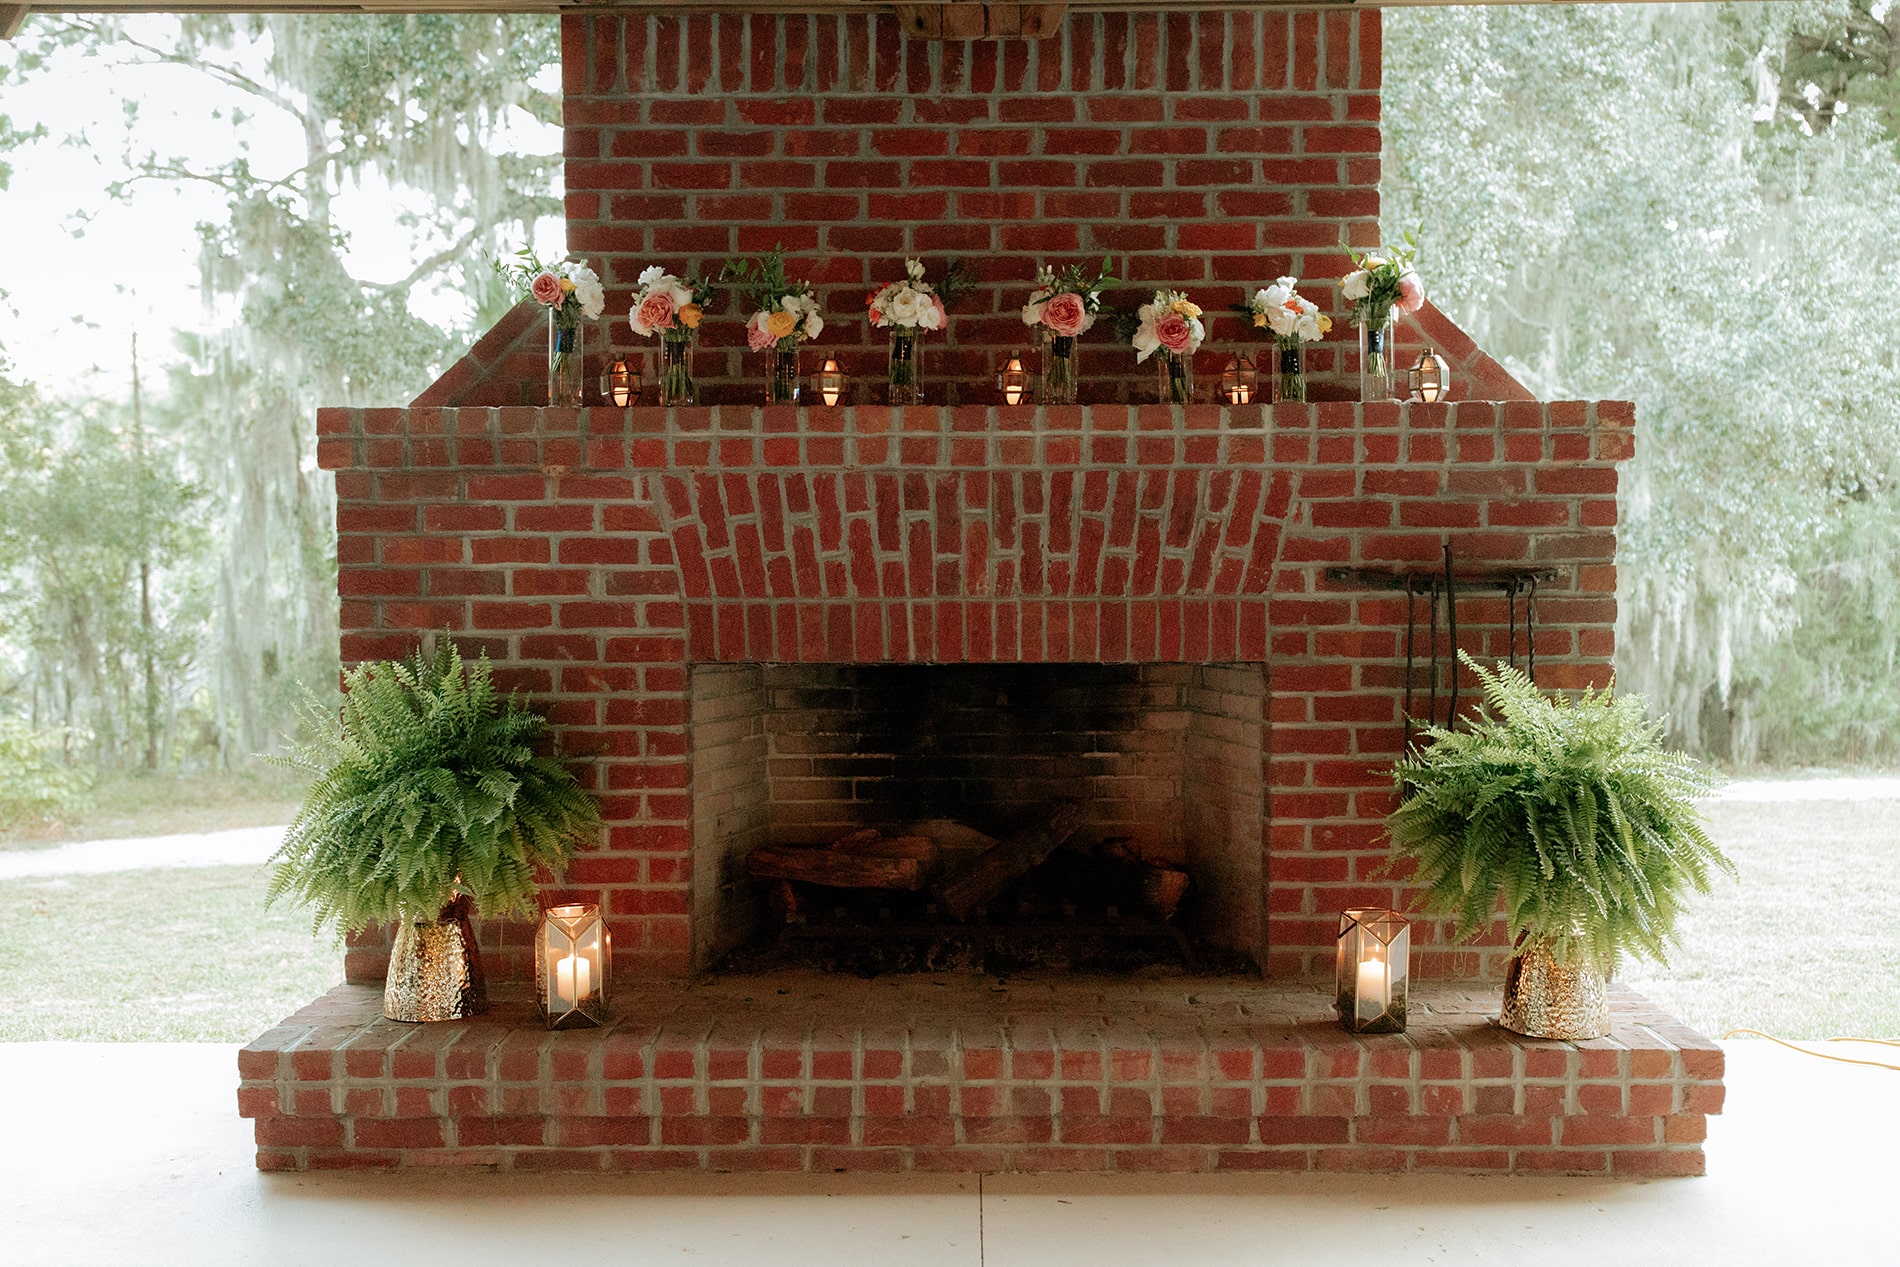 lowcountry-kitchen-catering-beaufort-sc-mary-grace-and-judd-kennedy-wedding-ceremony-outdoor-fireplace-min.jpg